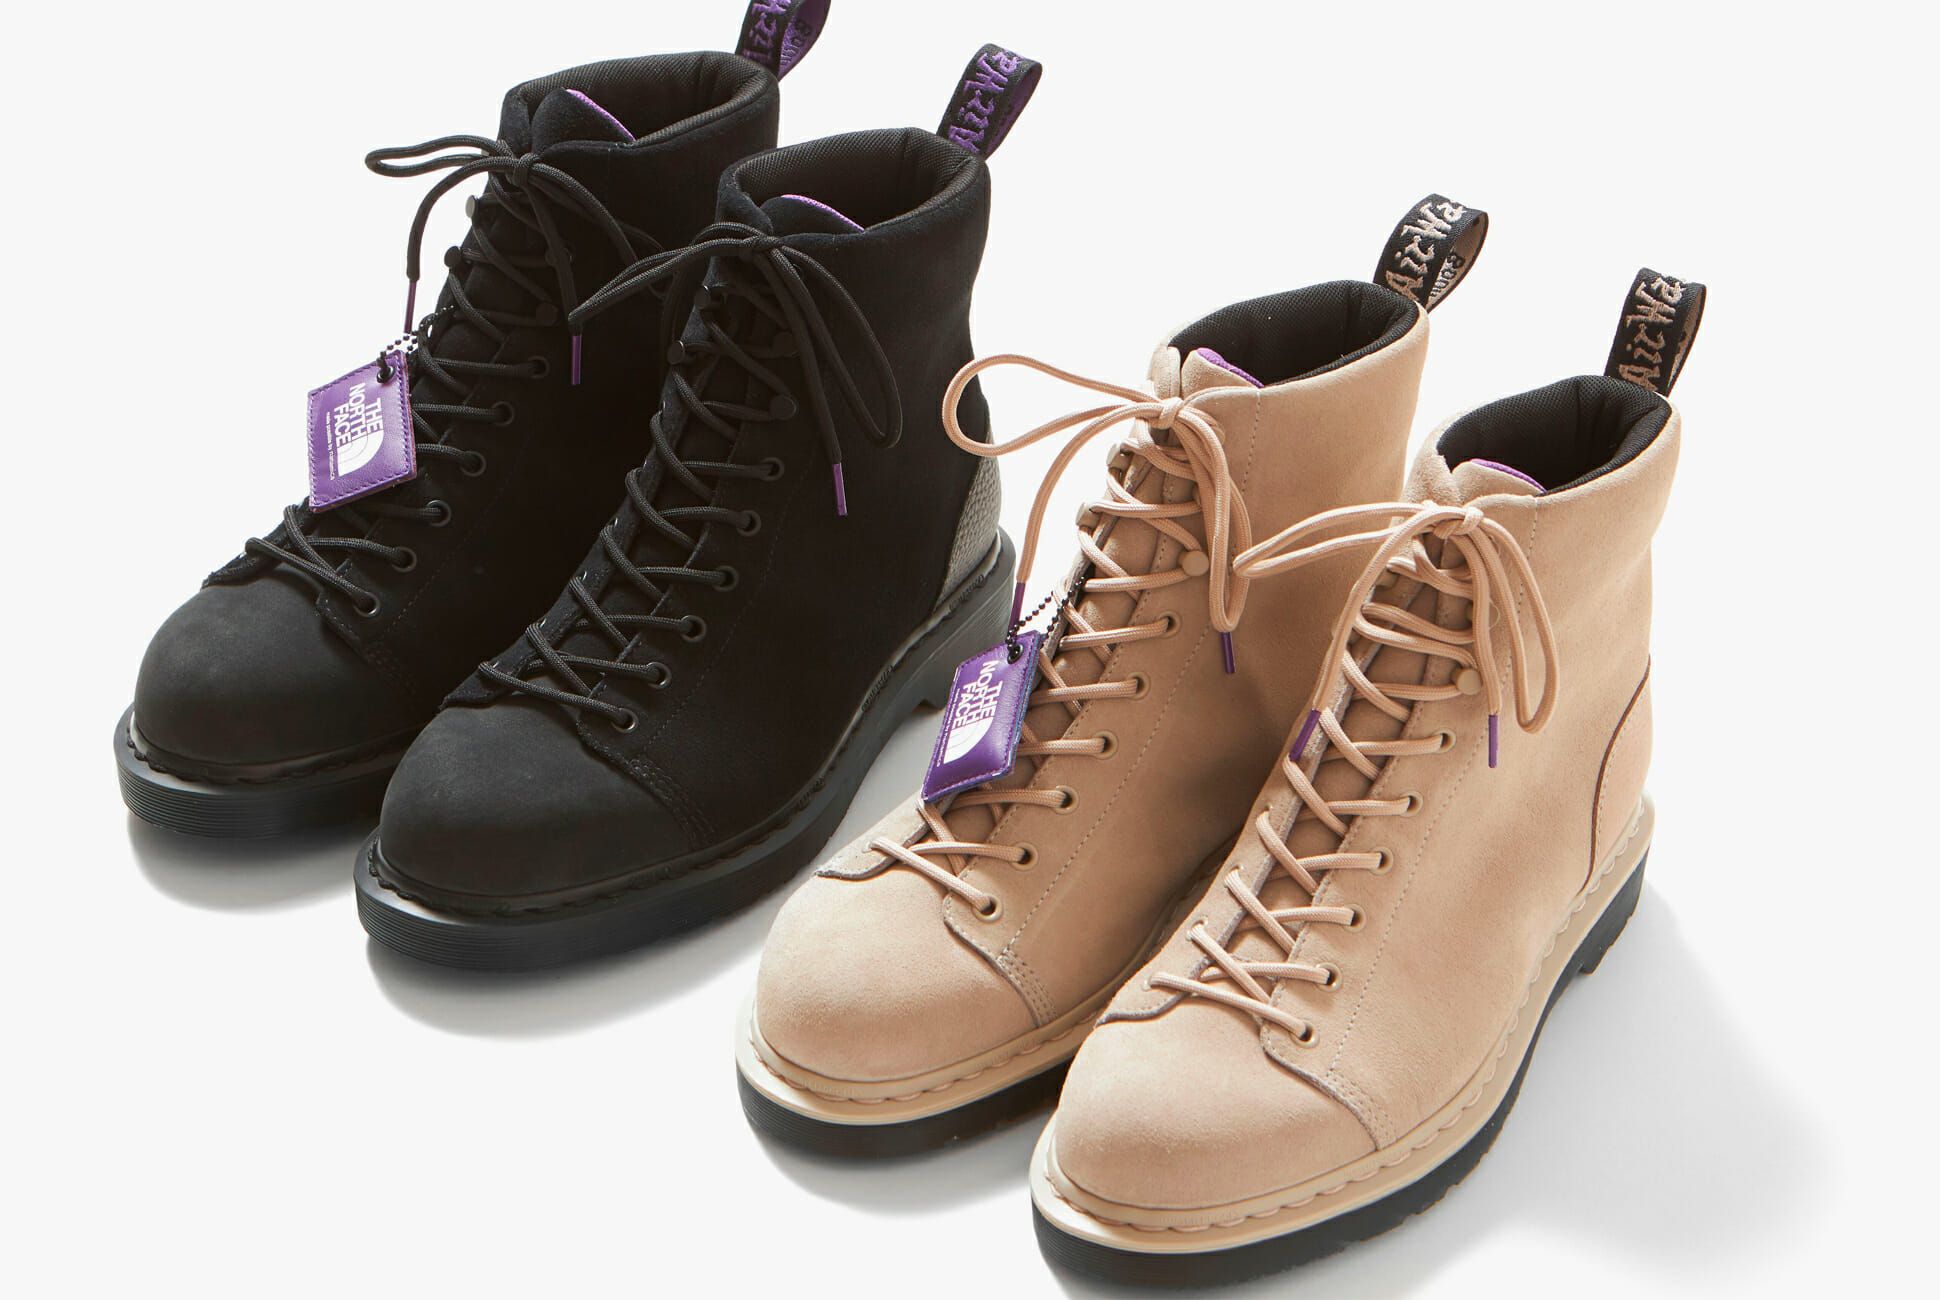 Dr. Martens and The North Face Purple Label Just Released These 